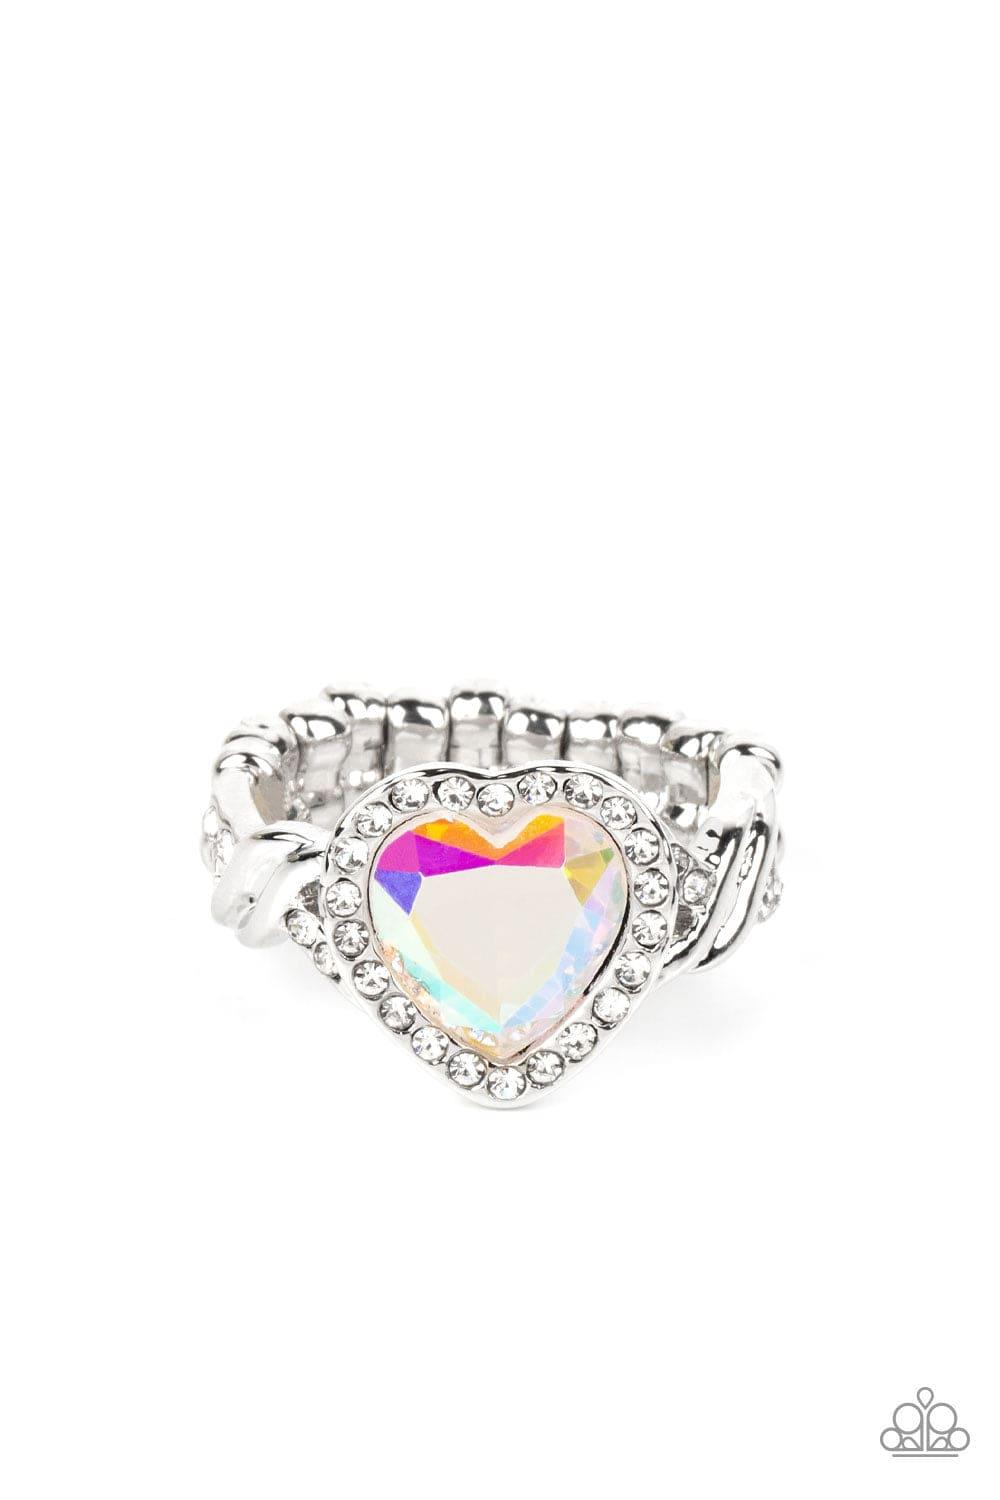 Paparazzi Accessories - Committed To Cupid - Multicolor Ring - Bling by JessieK